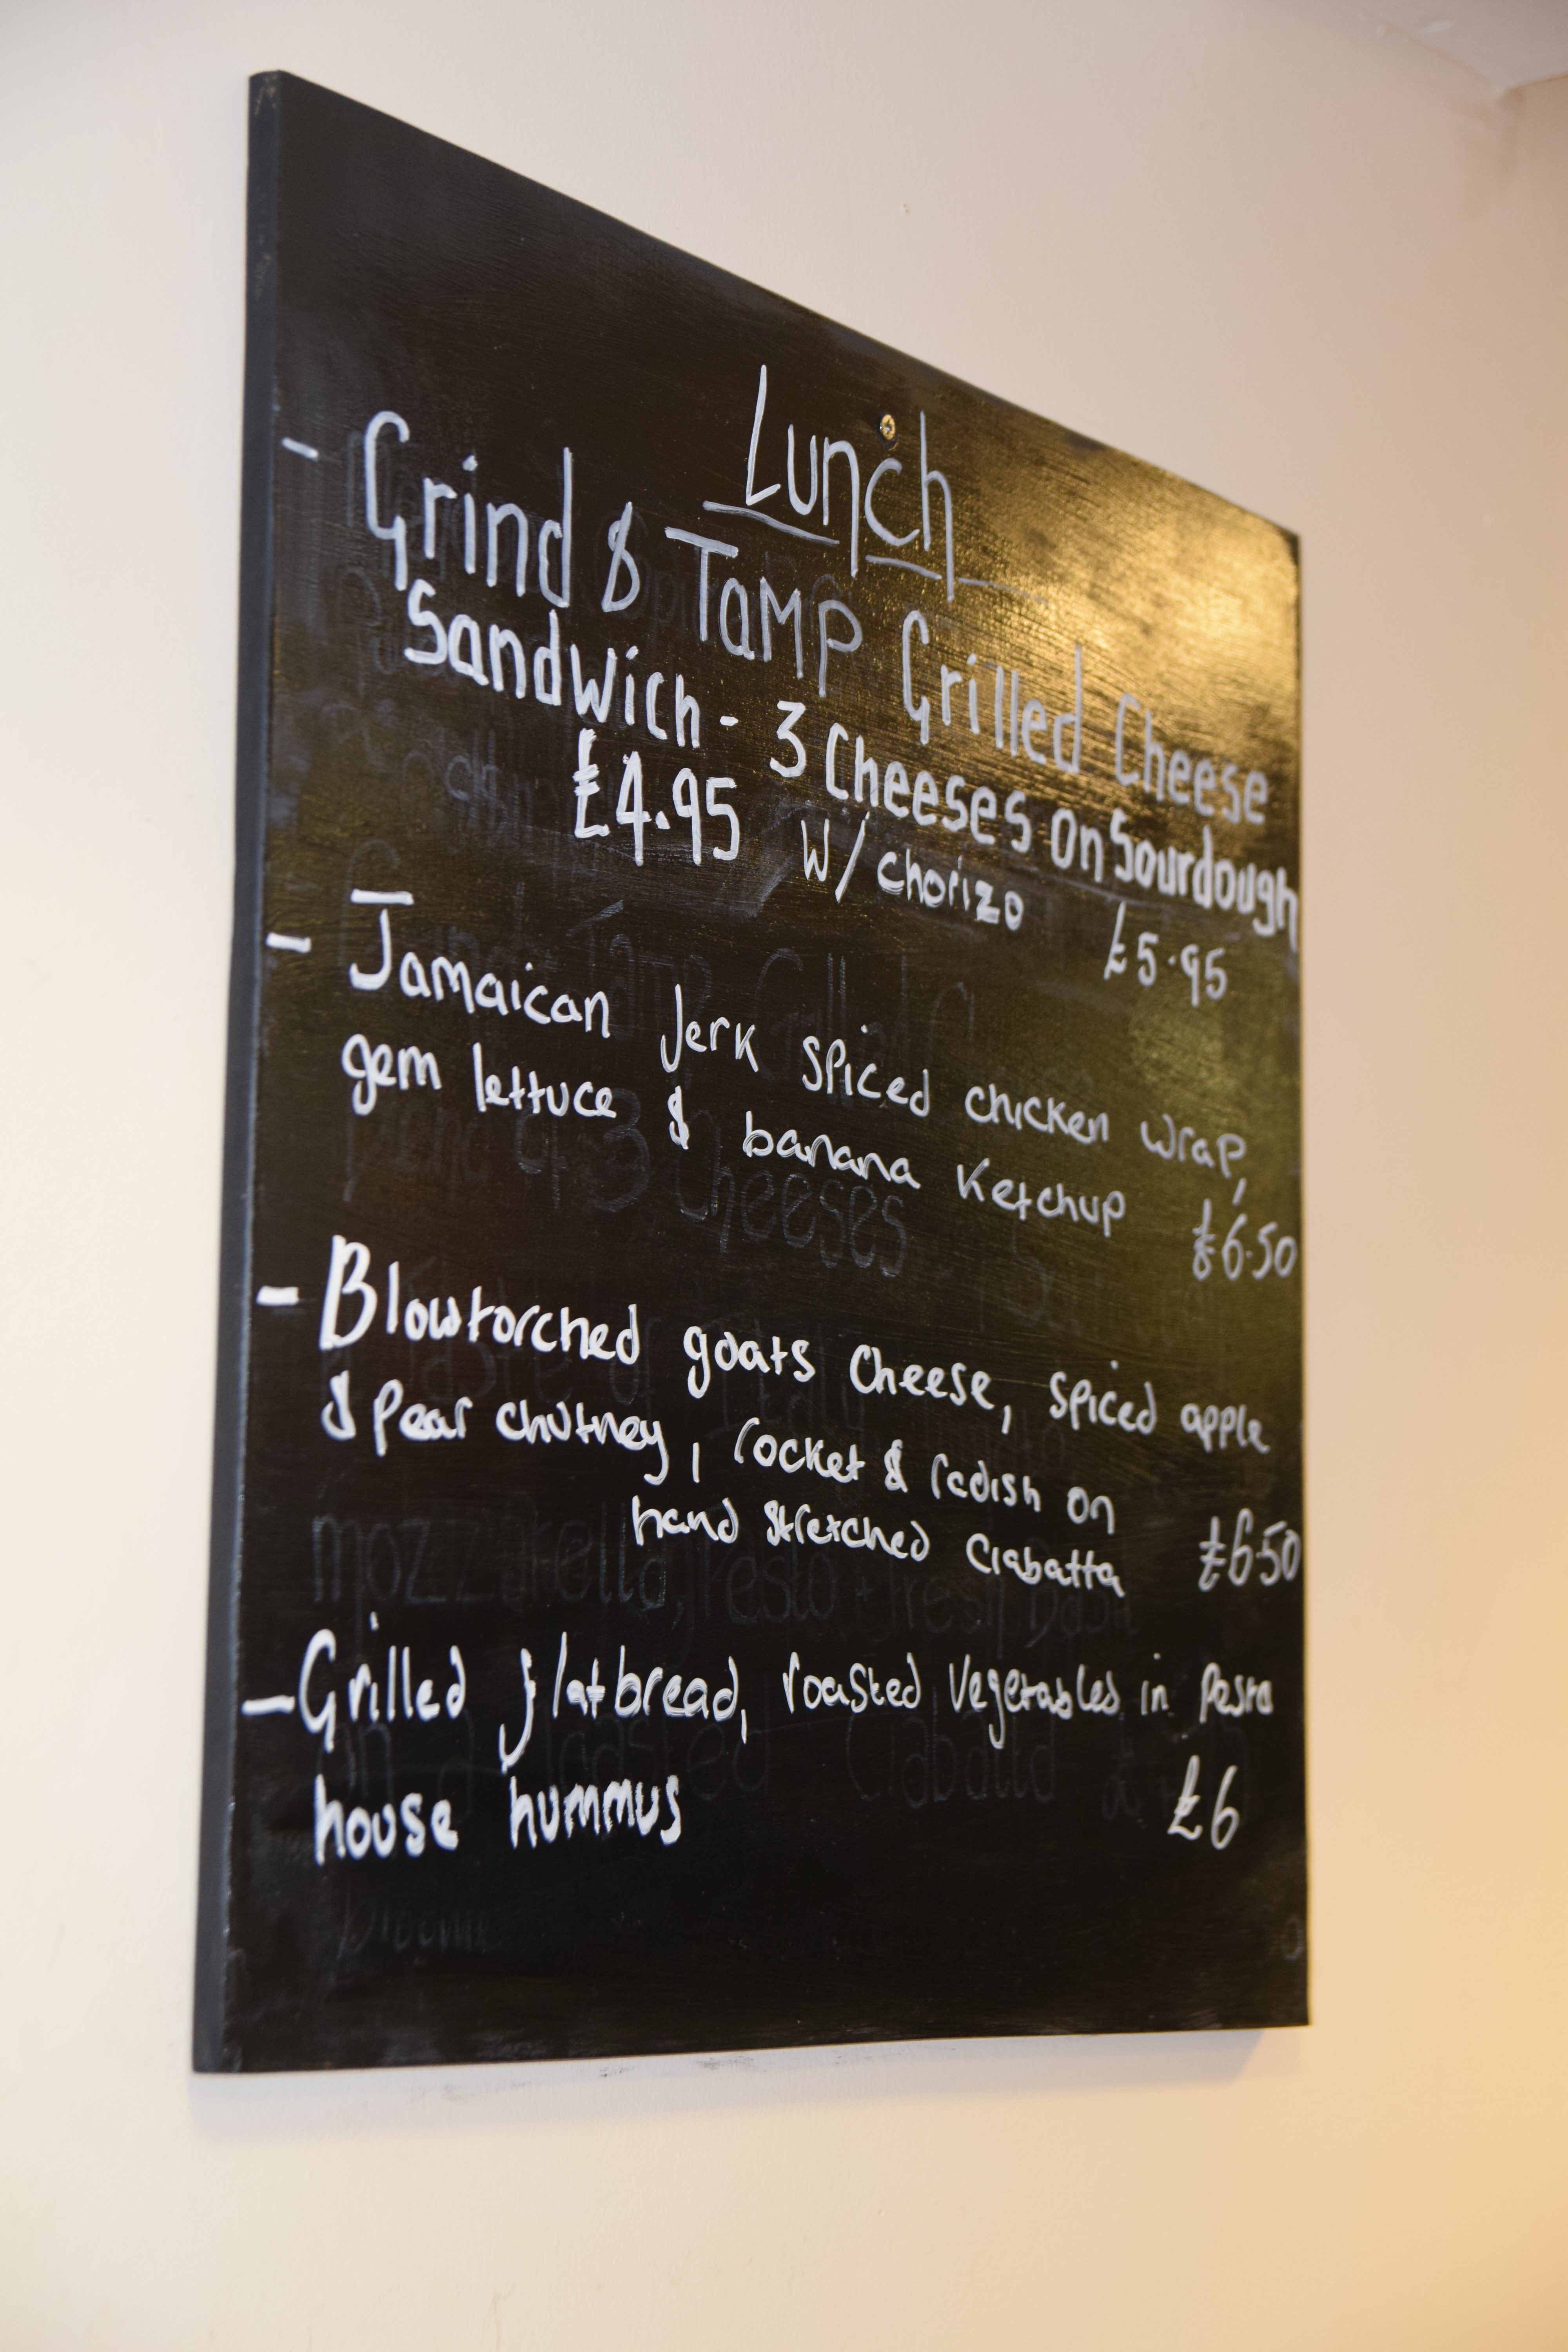 Grind and Tamp Lunch Menu